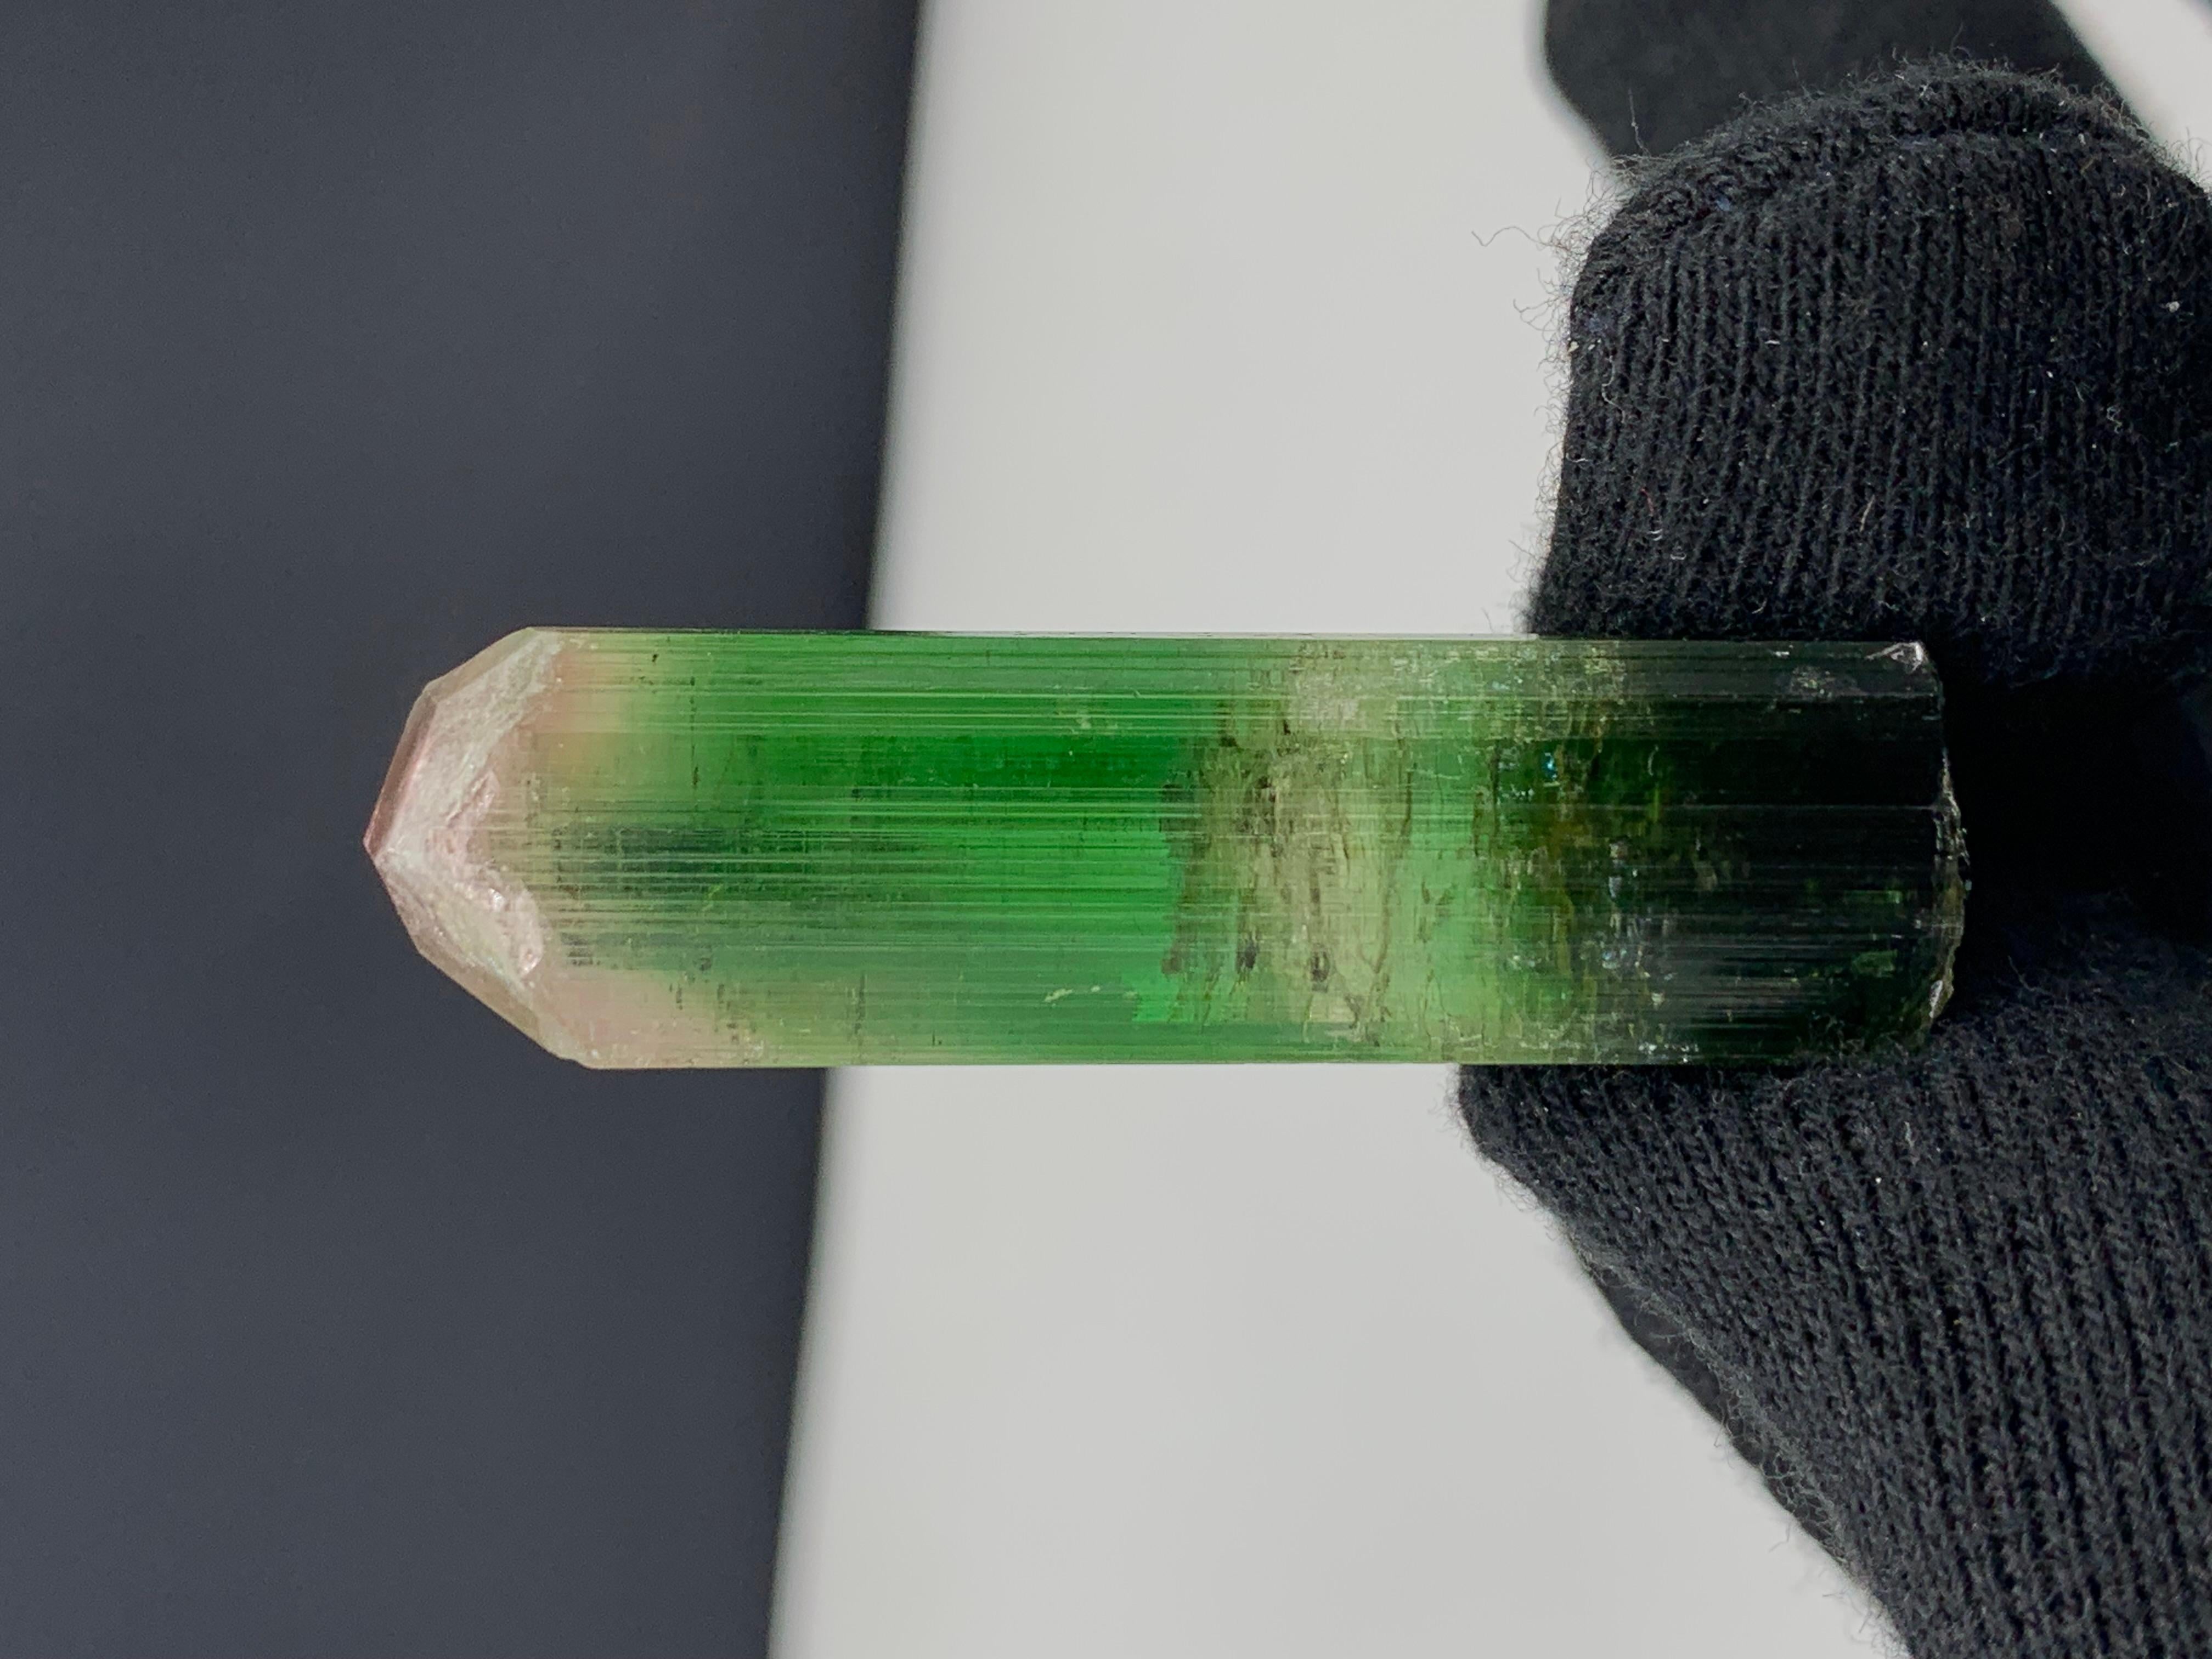 17.92 Gram Incredible Bi Color Tourmaline Crystal From Paprok , Afghanistan 

Weight: 17.92 Gram
Dimension: 5 x 1.4 x 1.2 Cm
Origin: Paprok, Nooristan Province, Afghanistan 

Tourmaline is a crystalline silicate mineral group in which boron is